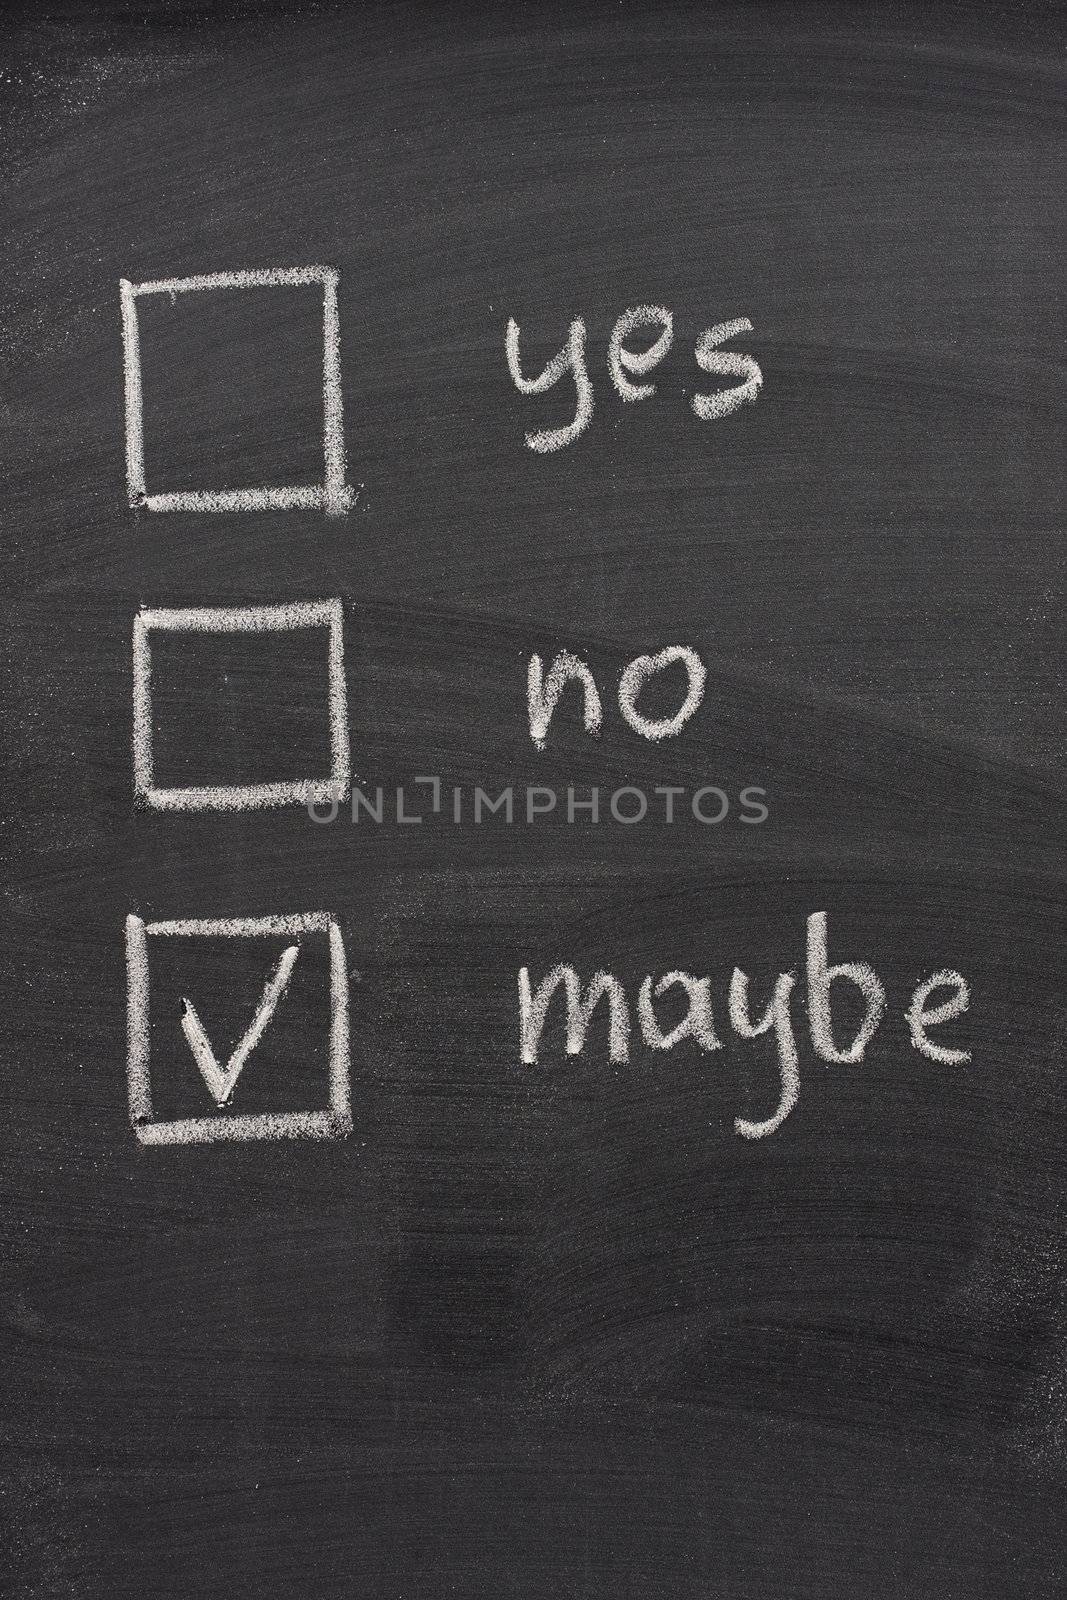 yes, no and maybe (checked) votting check boxes sketched with white chalk on blackboard, uncertainty or hesitation concept